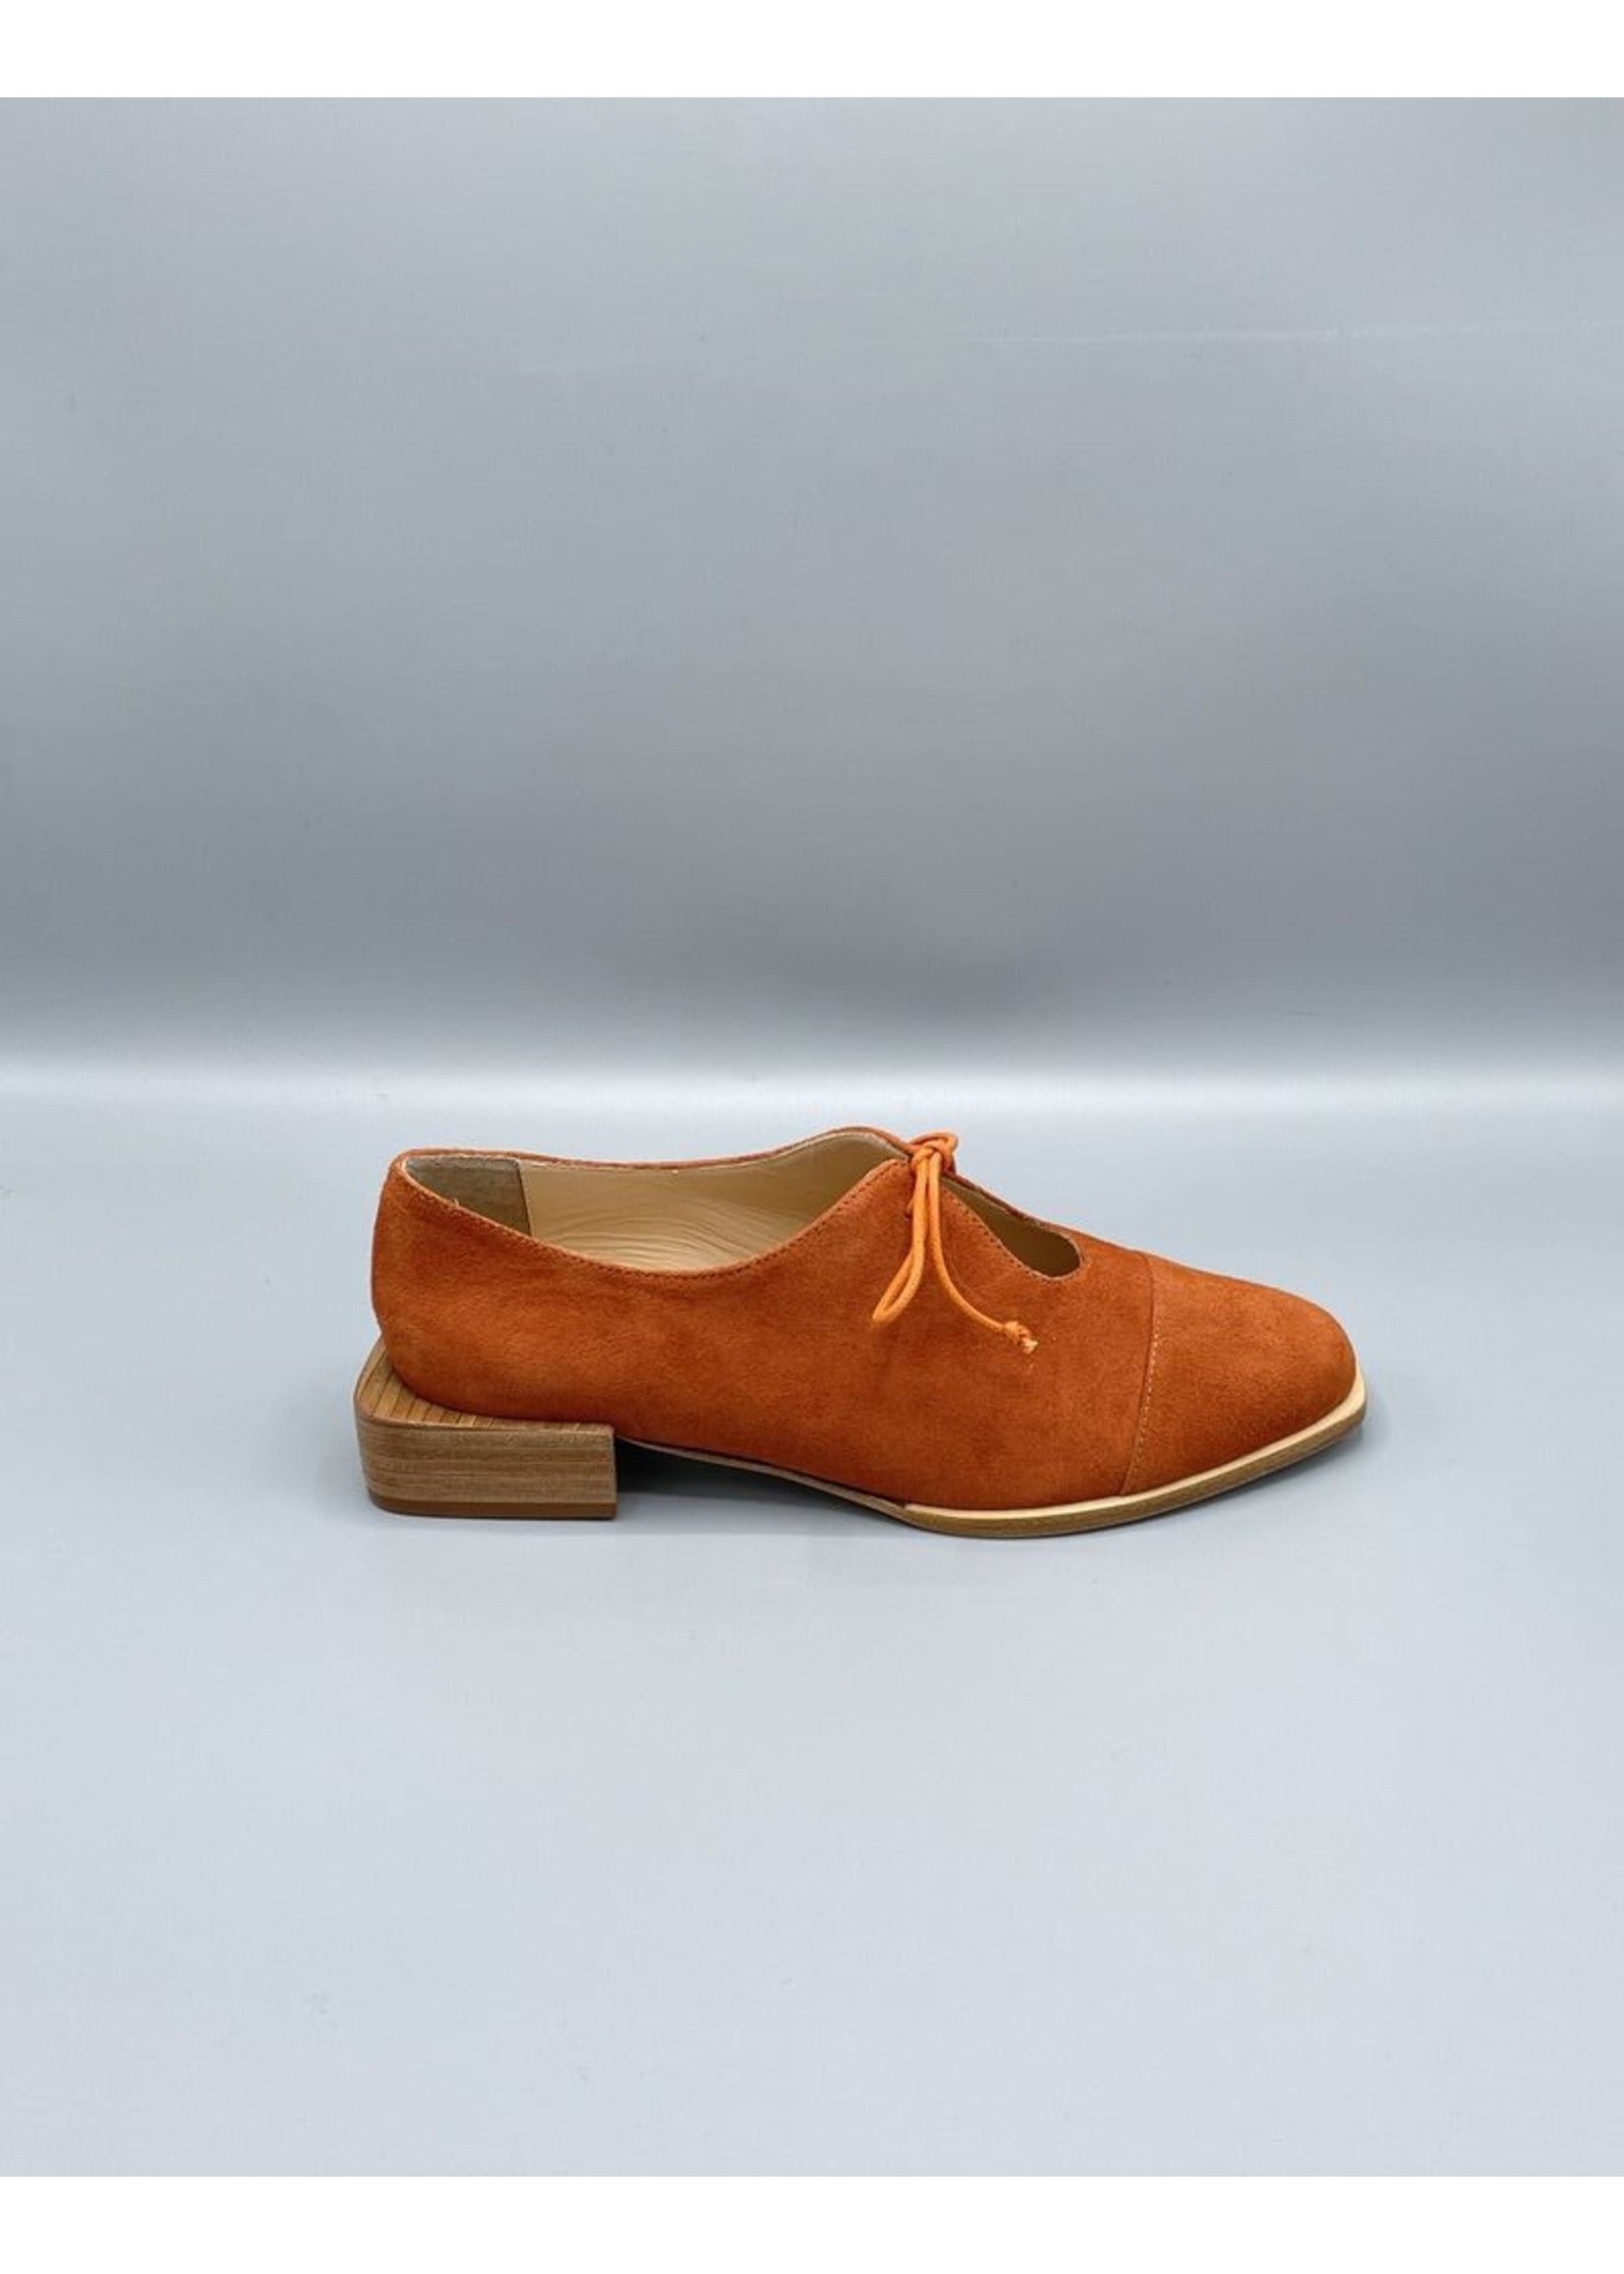 Lorraci Rounded Square Toe Tie Flat